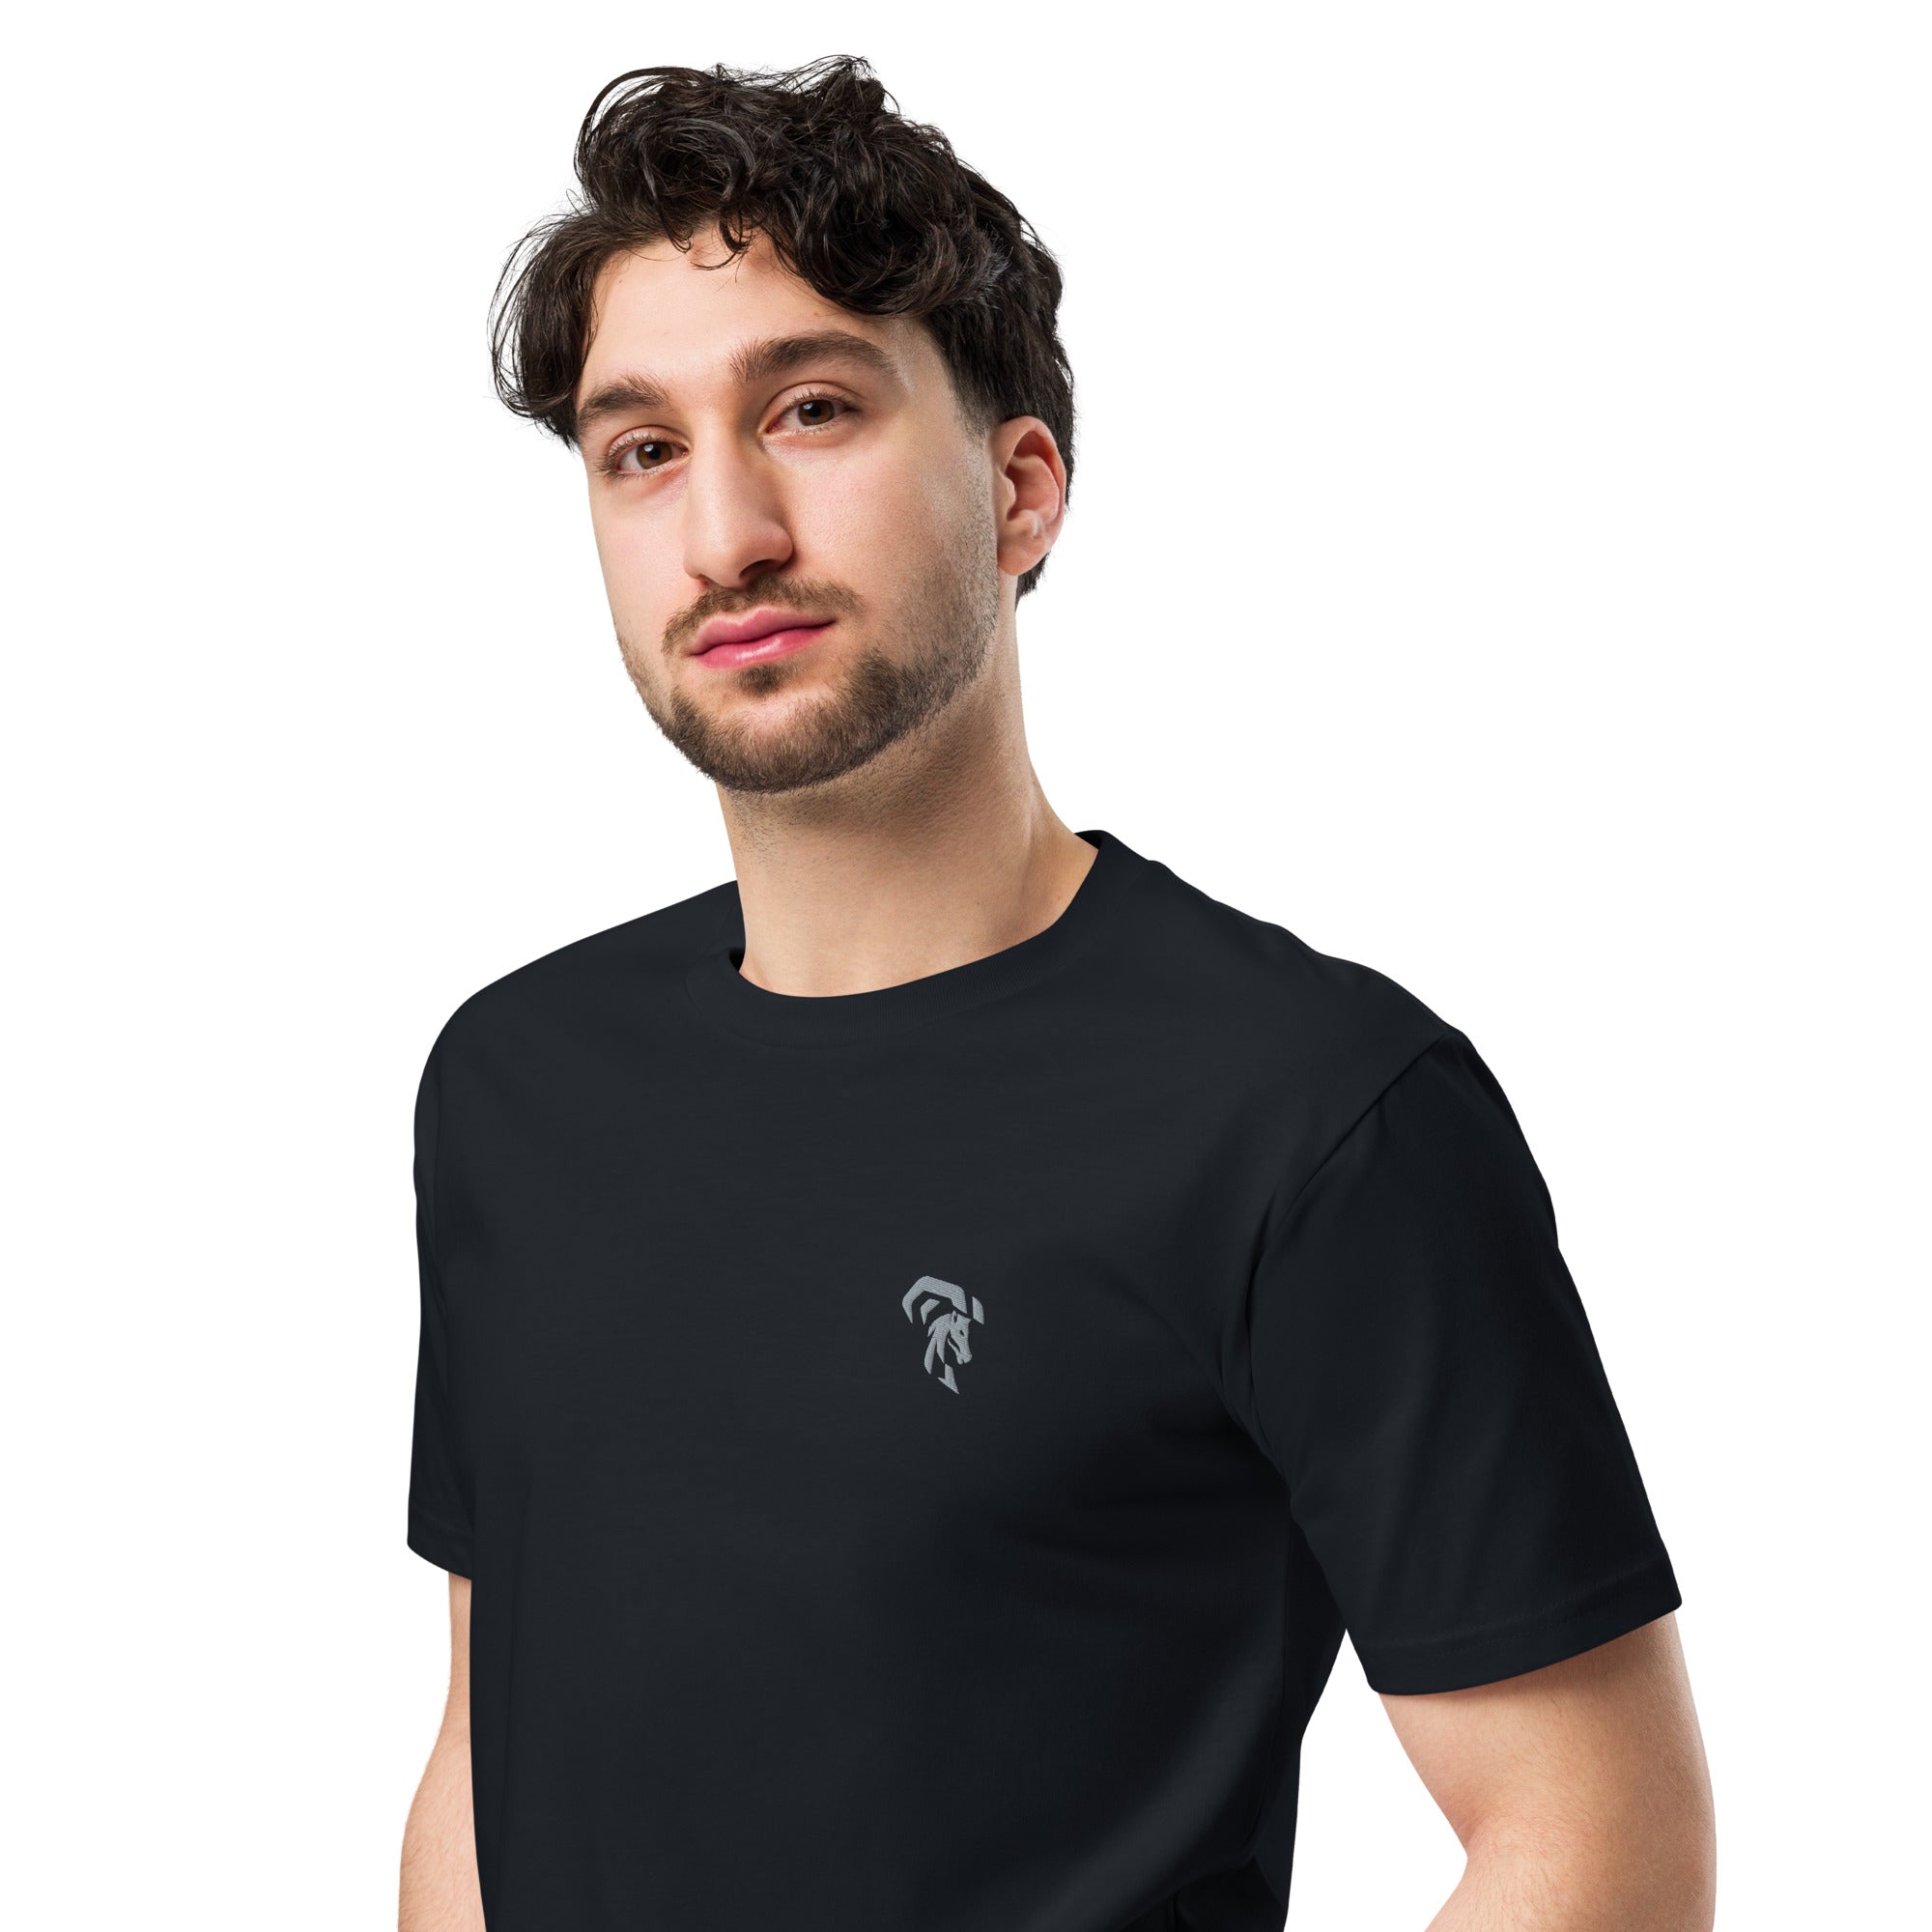 Elevate Your Wardrobe with the Filly Style Unisex Premium T-Shirt